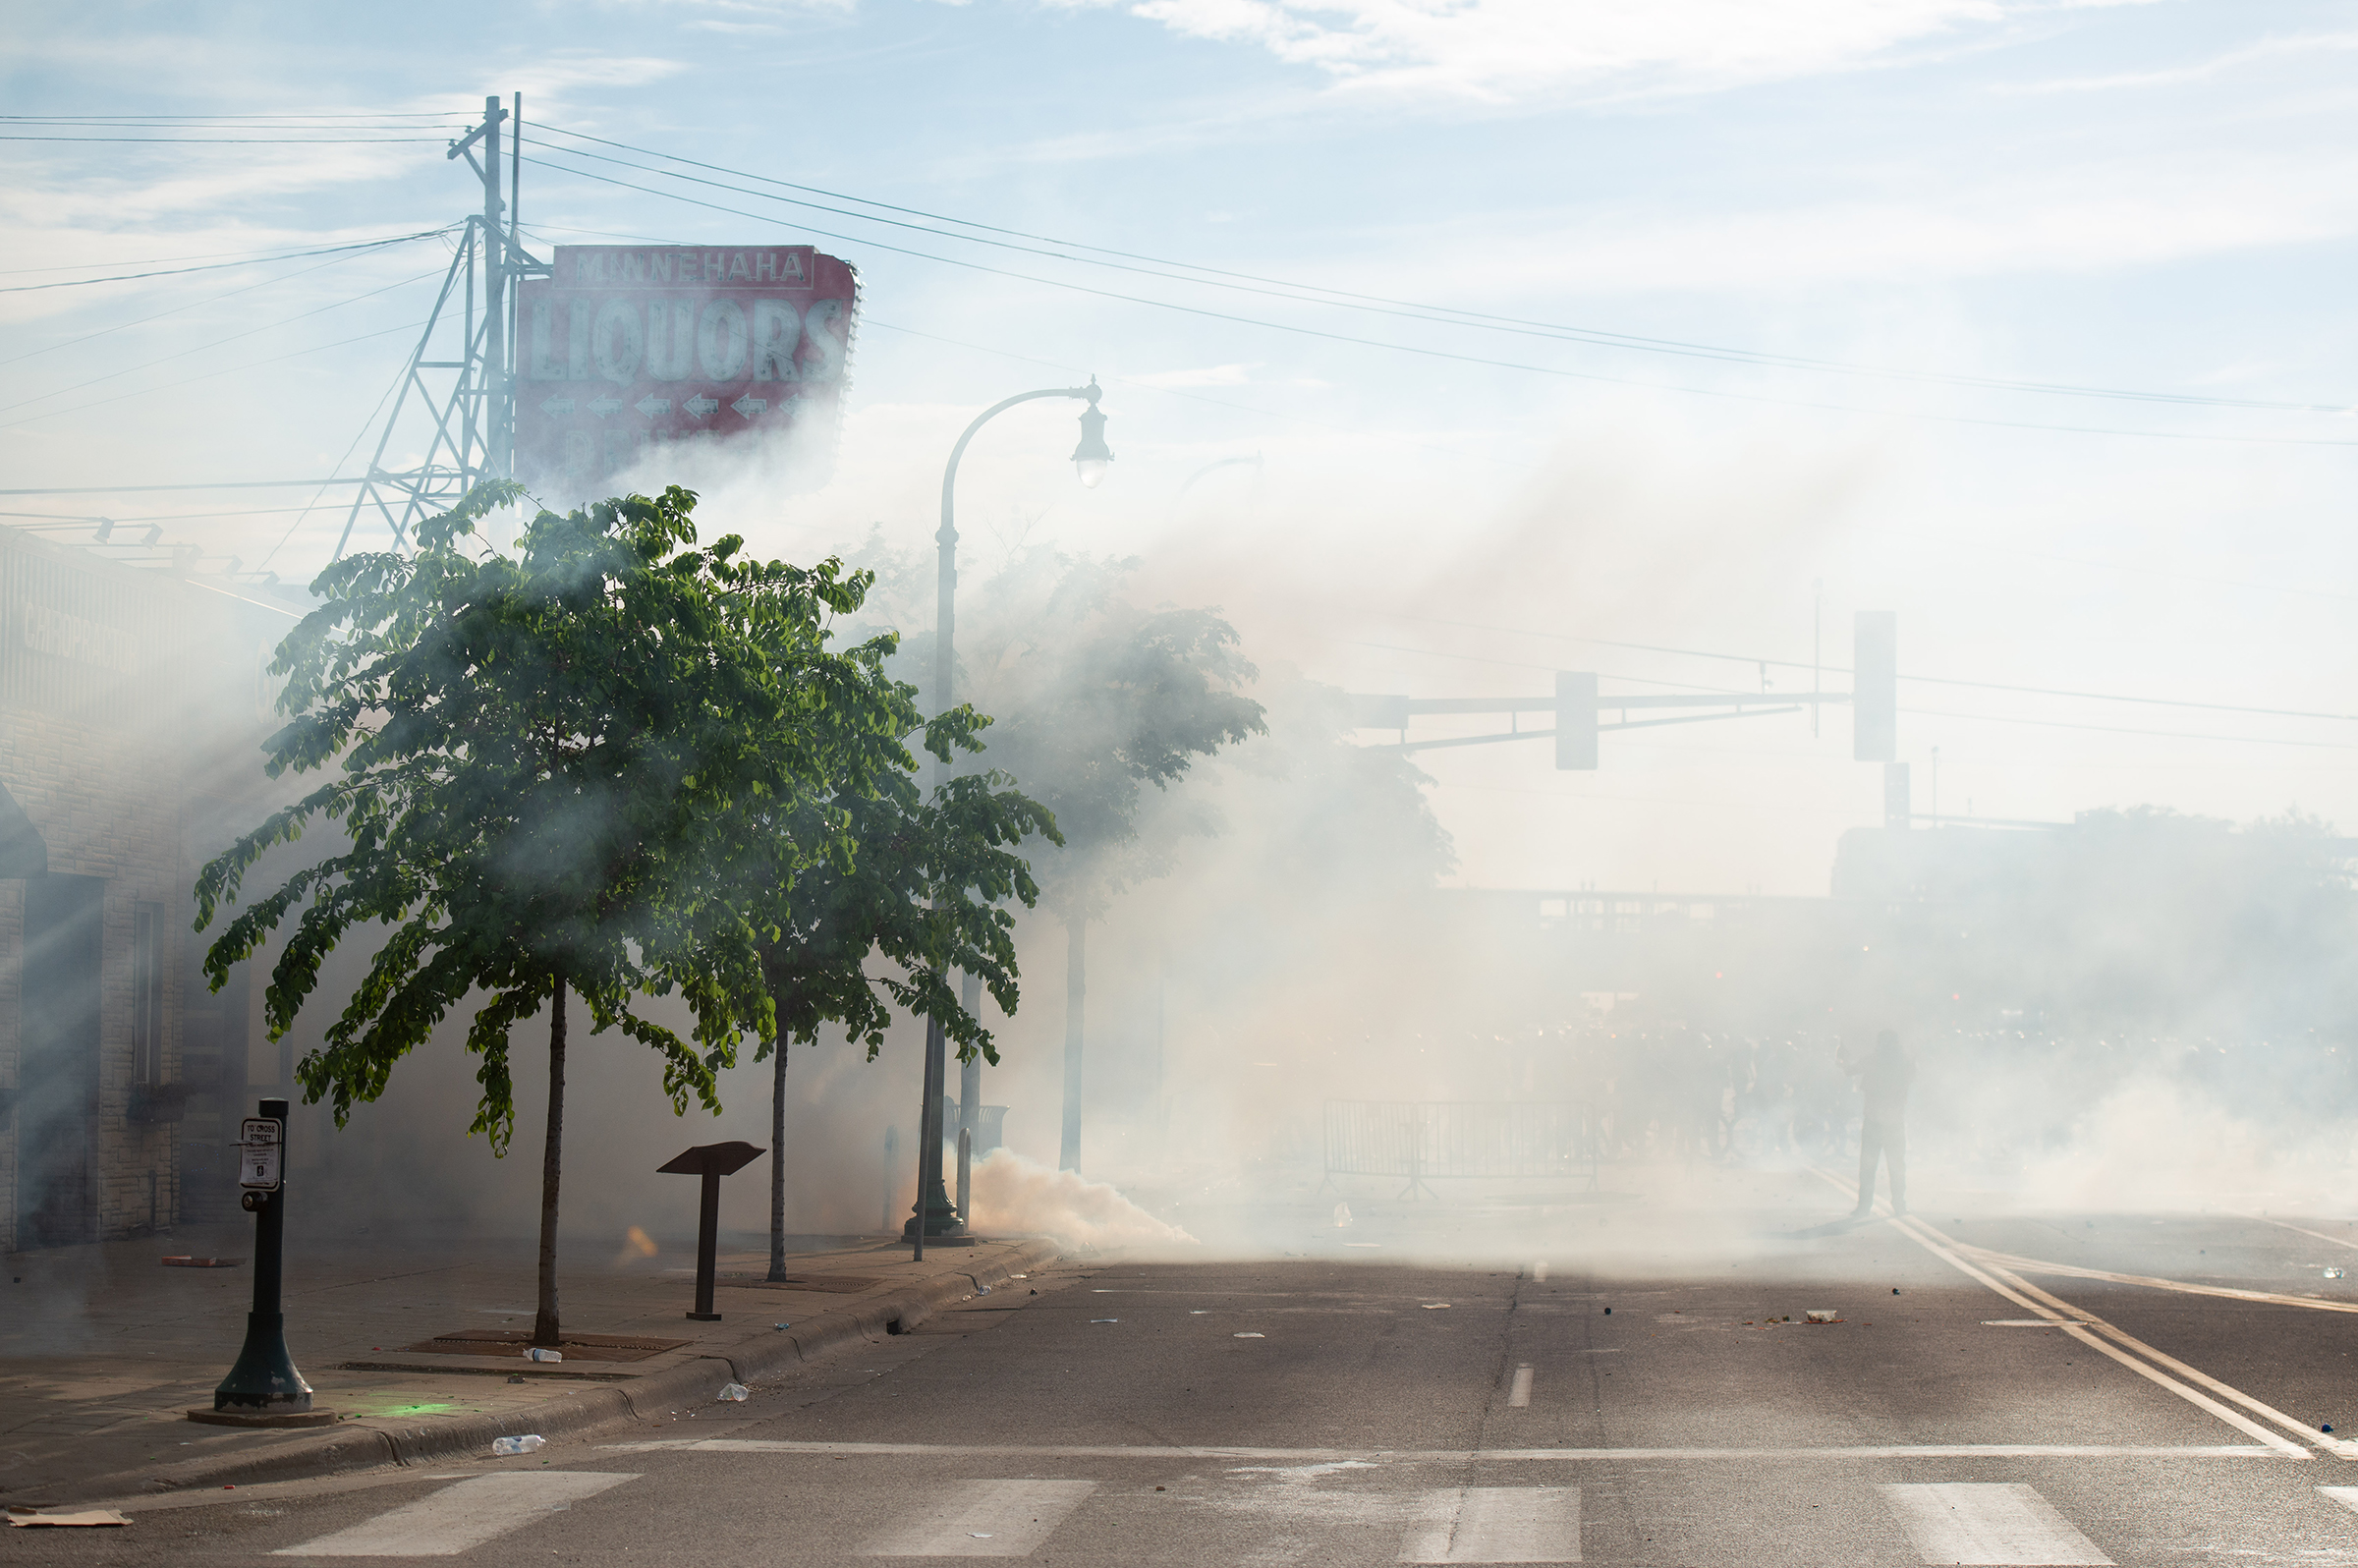 Clouds of tear gas linger in the air over Lake Street during the second day of protests in Minneapolis on May 27. (Steel Brooks—Anadolu Agency/Getty Images)